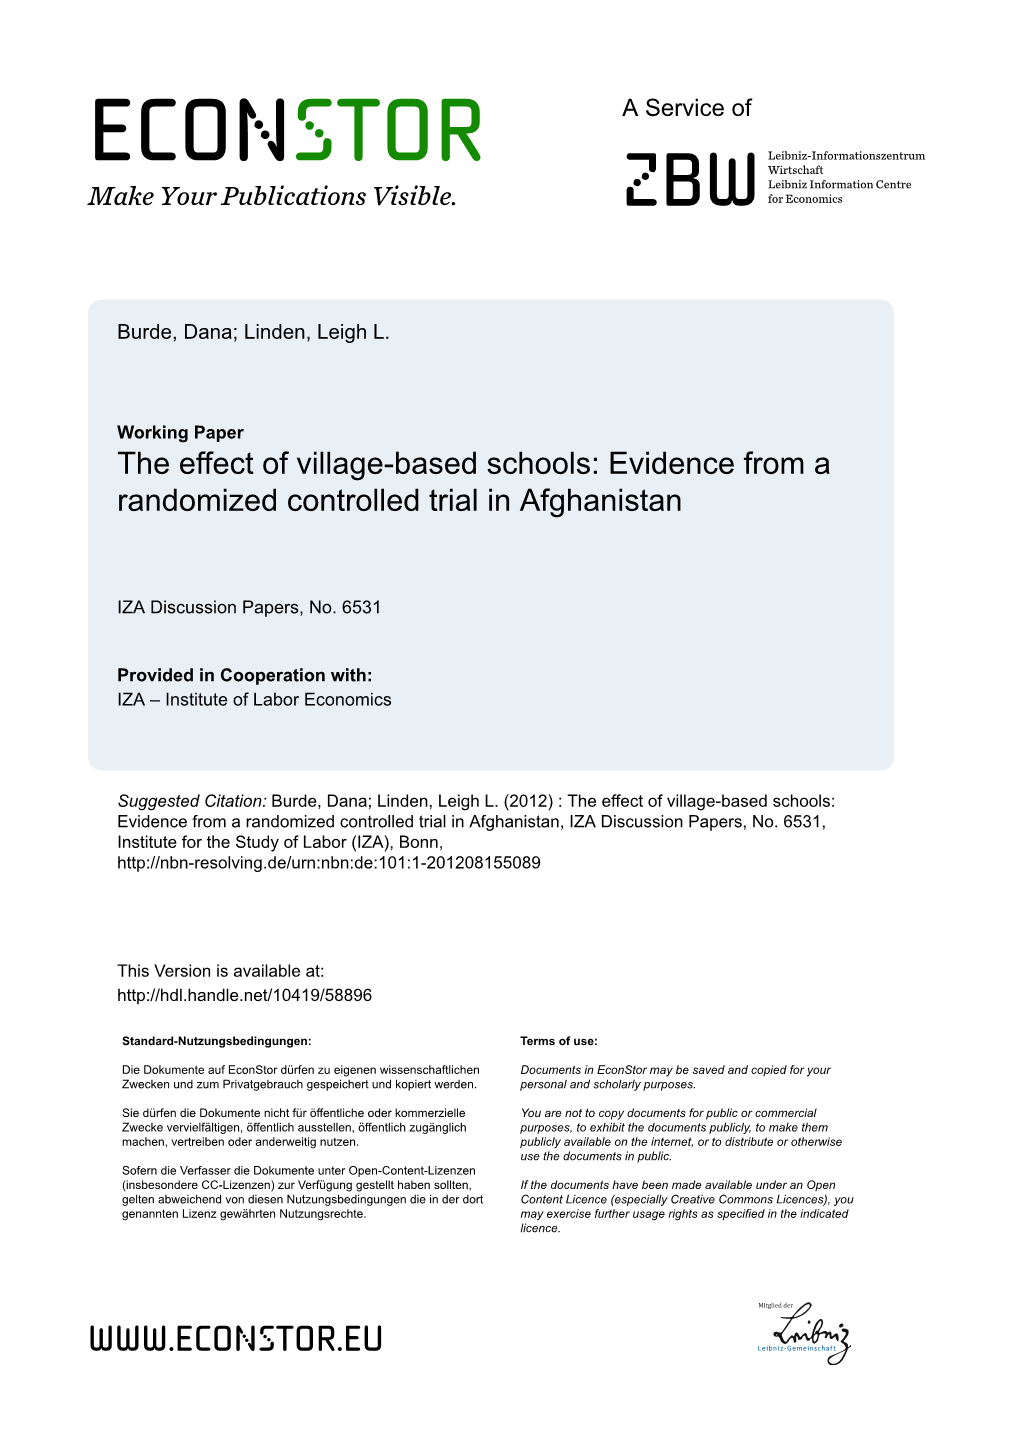 The Effect of Village-Based Schools: Evidence from a Randomized Controlled Trial in Afghanistan